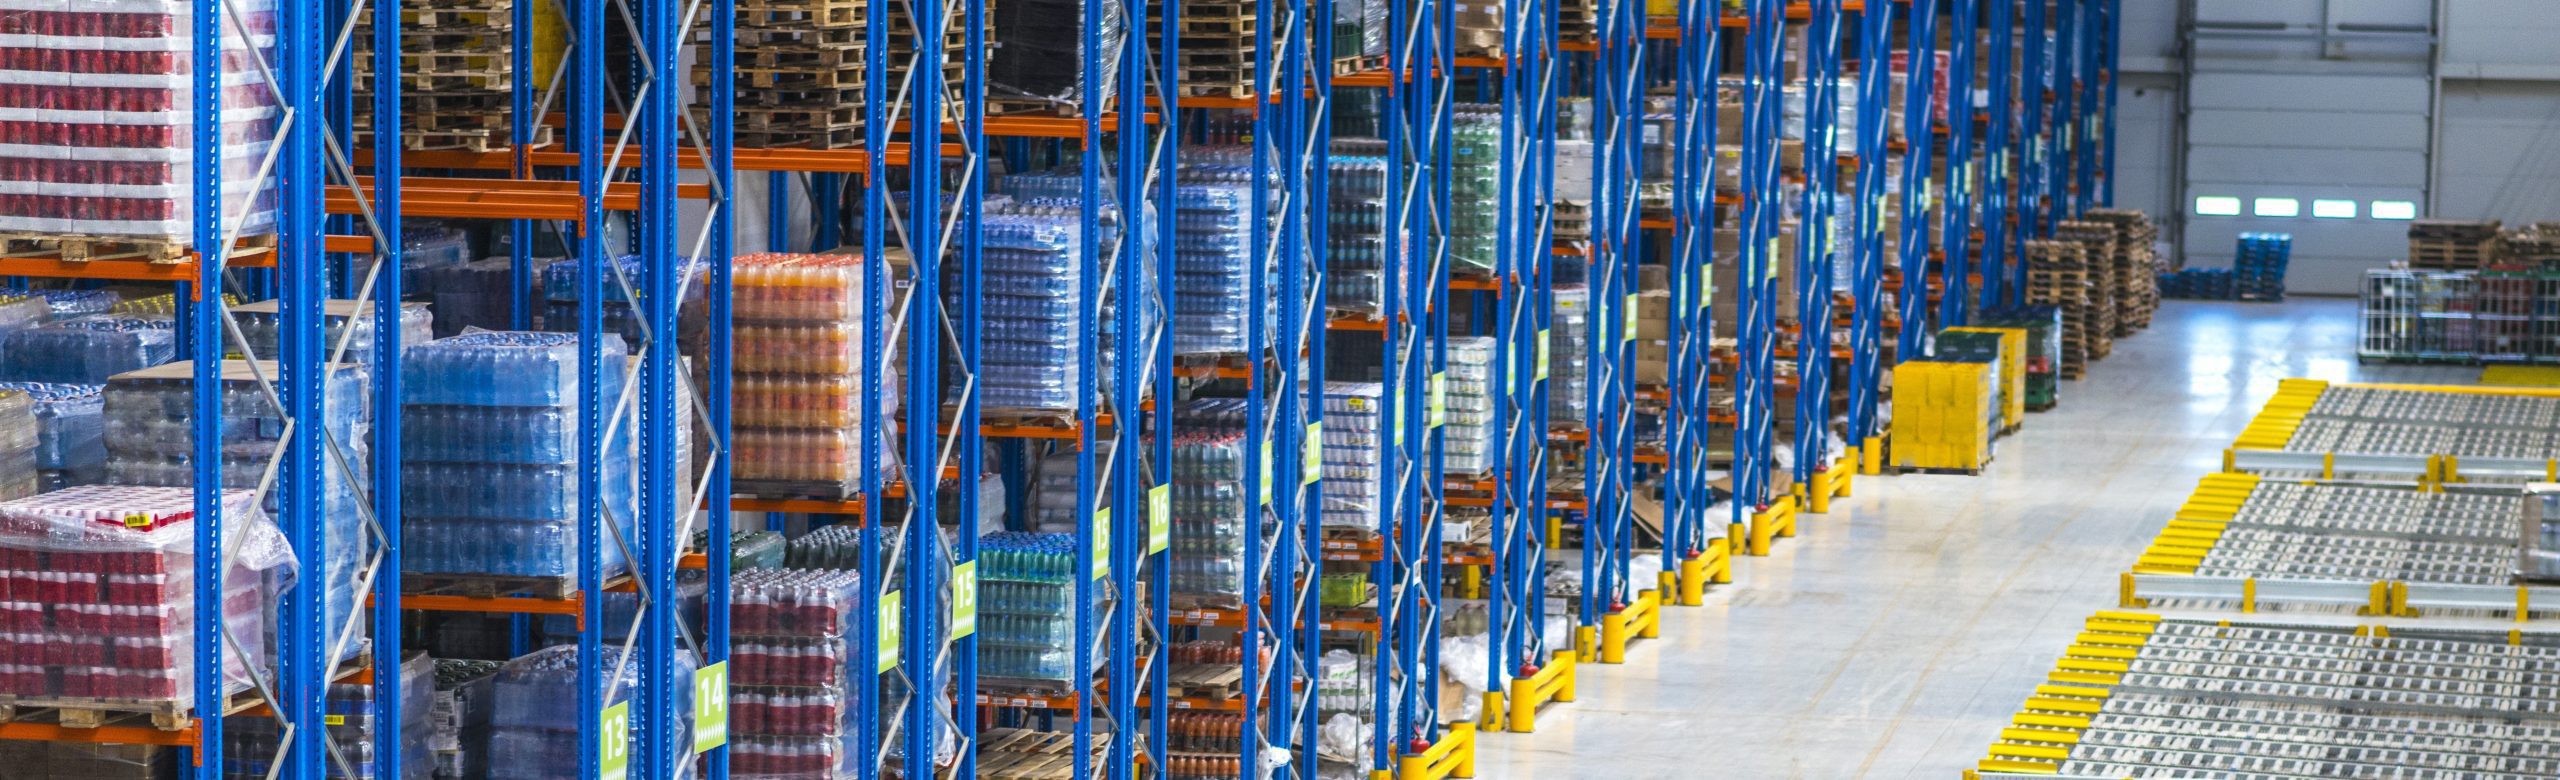 Industrial Racking System in a distribution warehouse building with large storage area and goods on shelves.